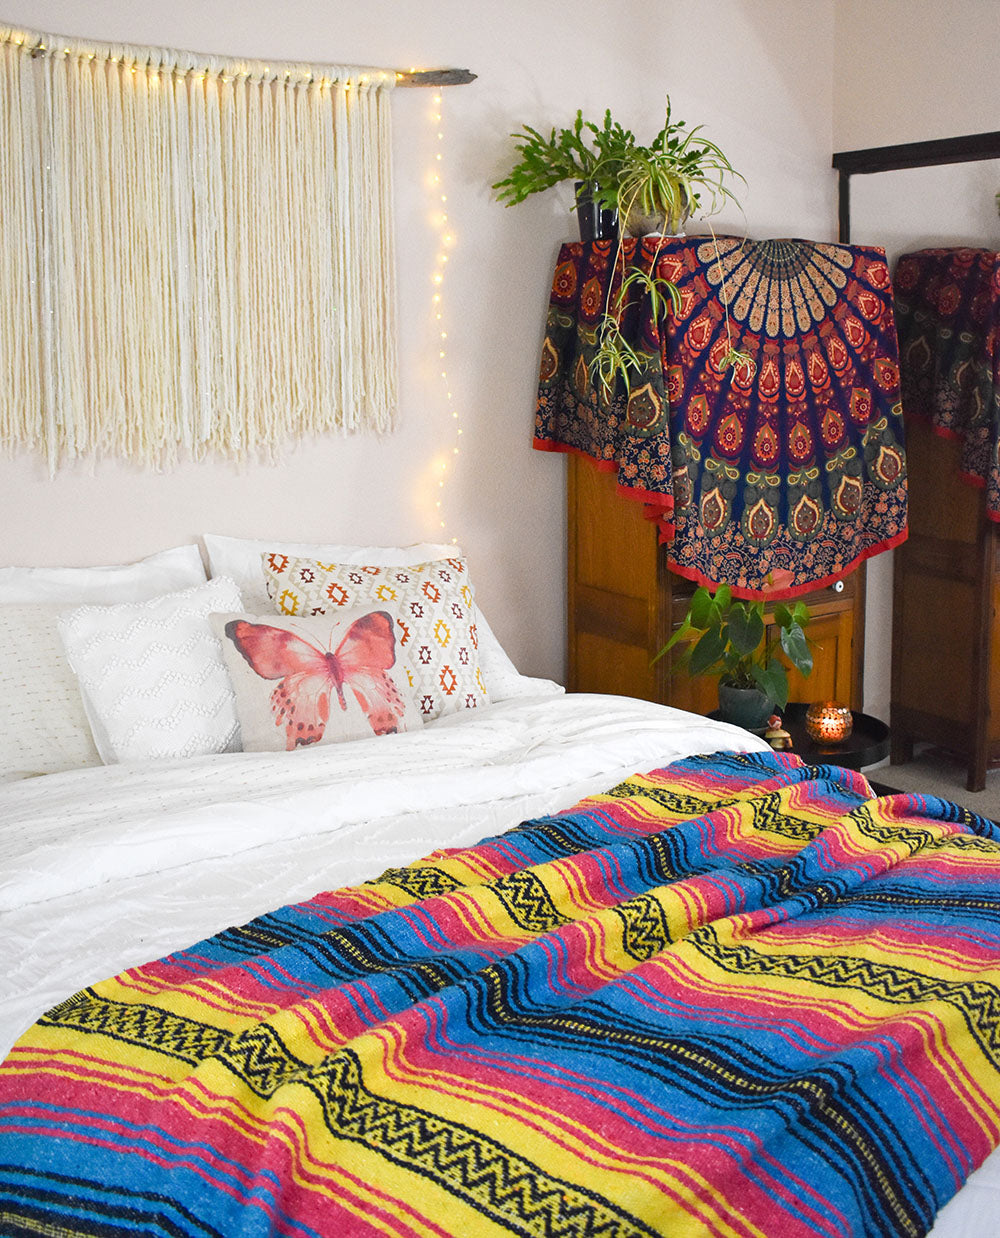 The Sunshine Day Dream blanket looks beautiful in the boho bedroom and adds so much color and warmth.